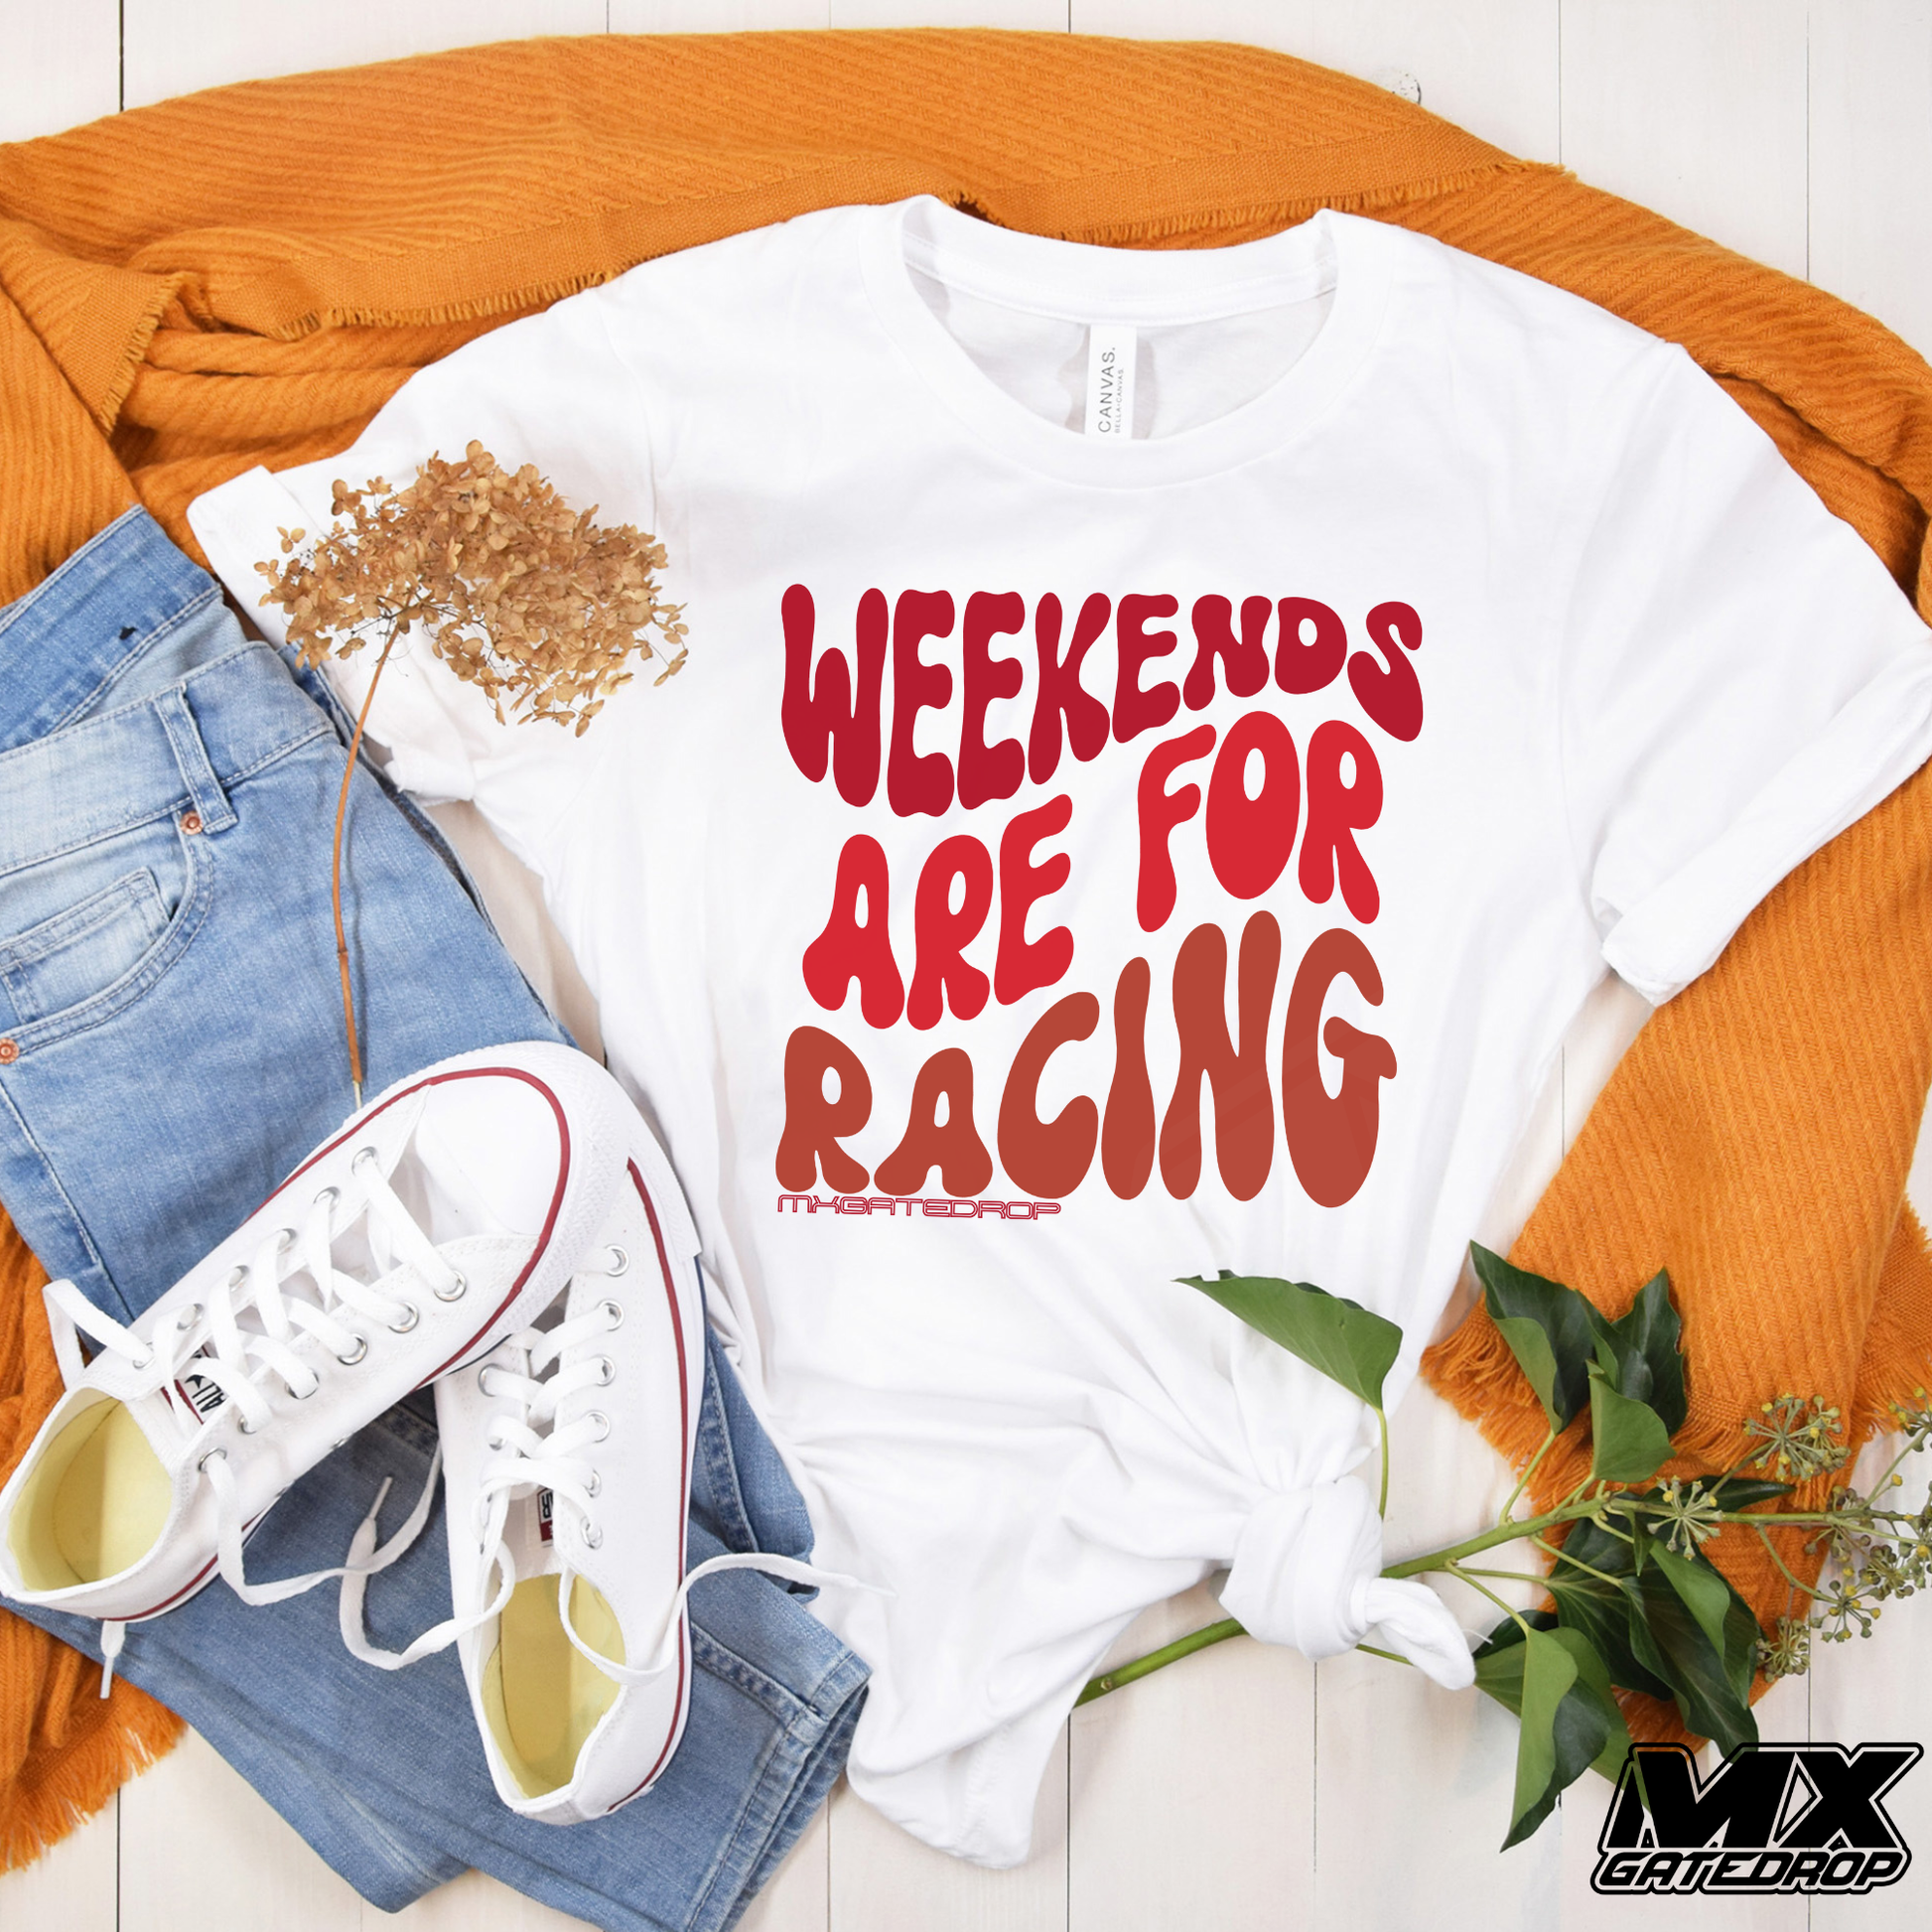 Weekends Are For Racing Shirt